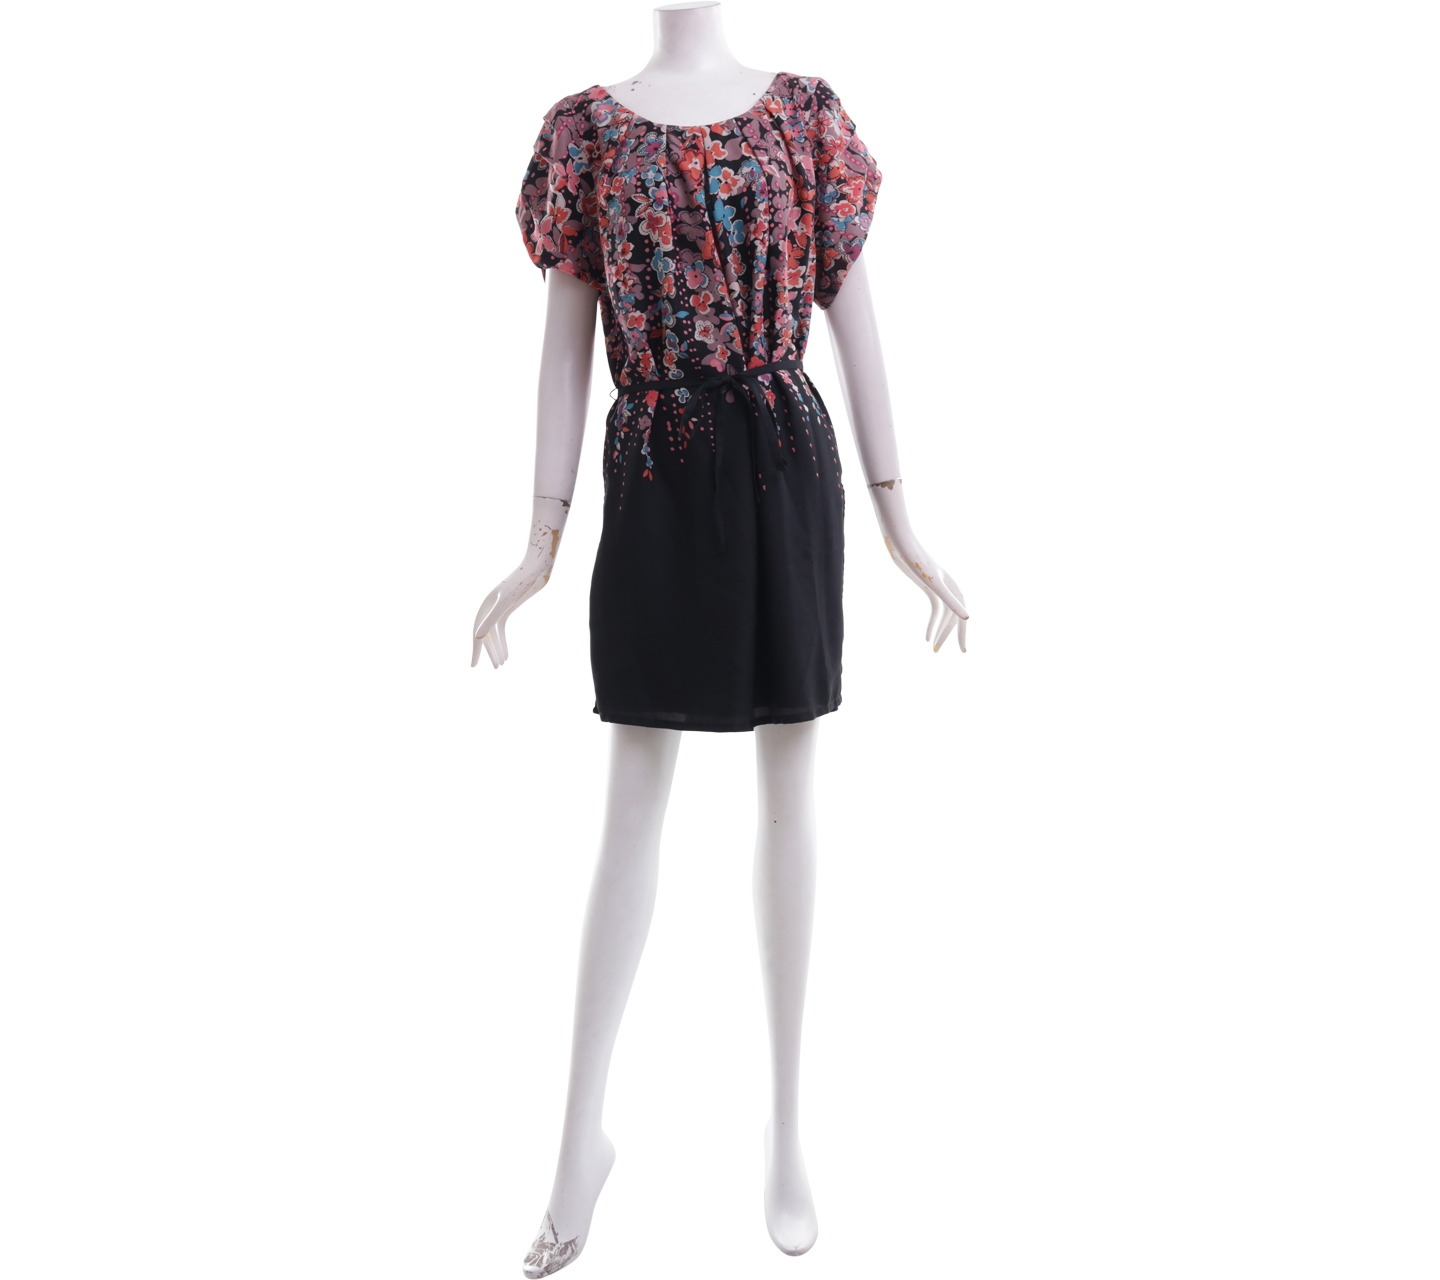 Great Plains Printed Floral Black Tunic Blouse